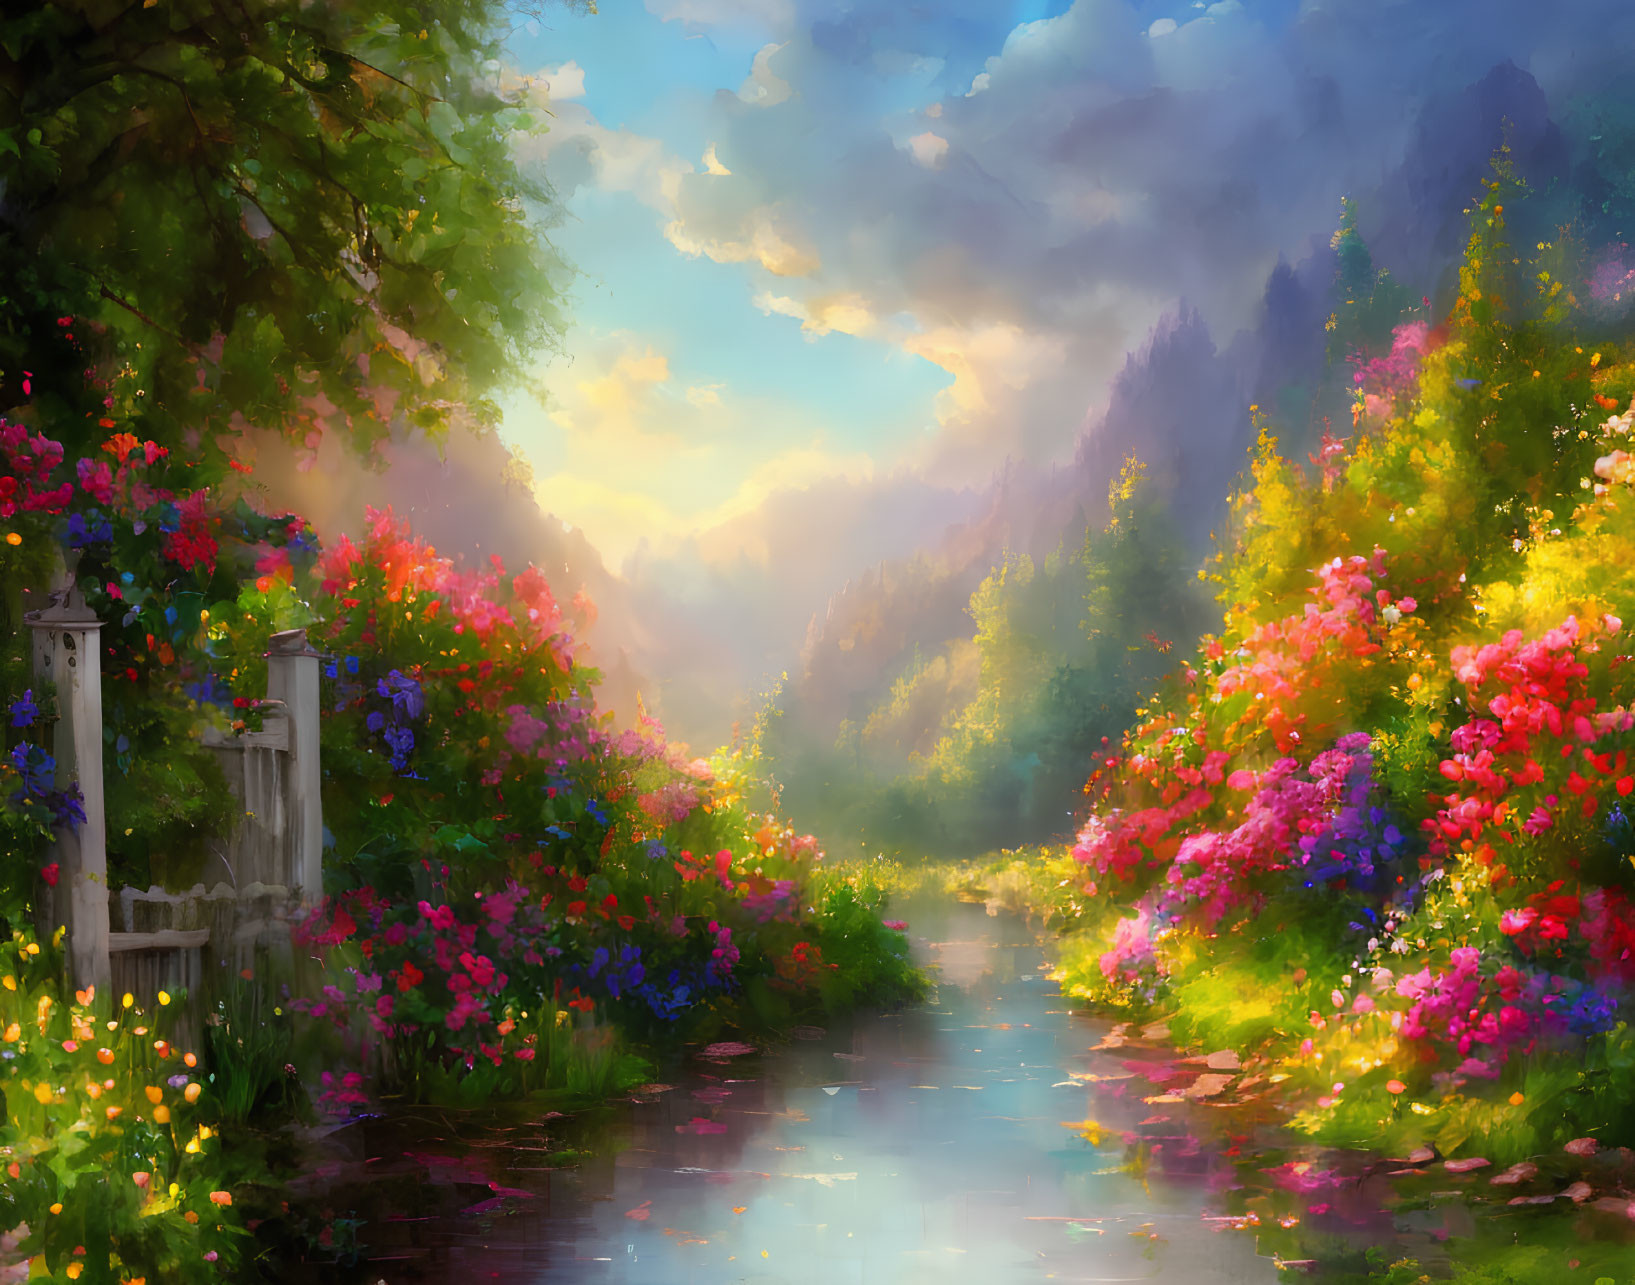 Tranquil garden path with colorful flowers and serene waterway